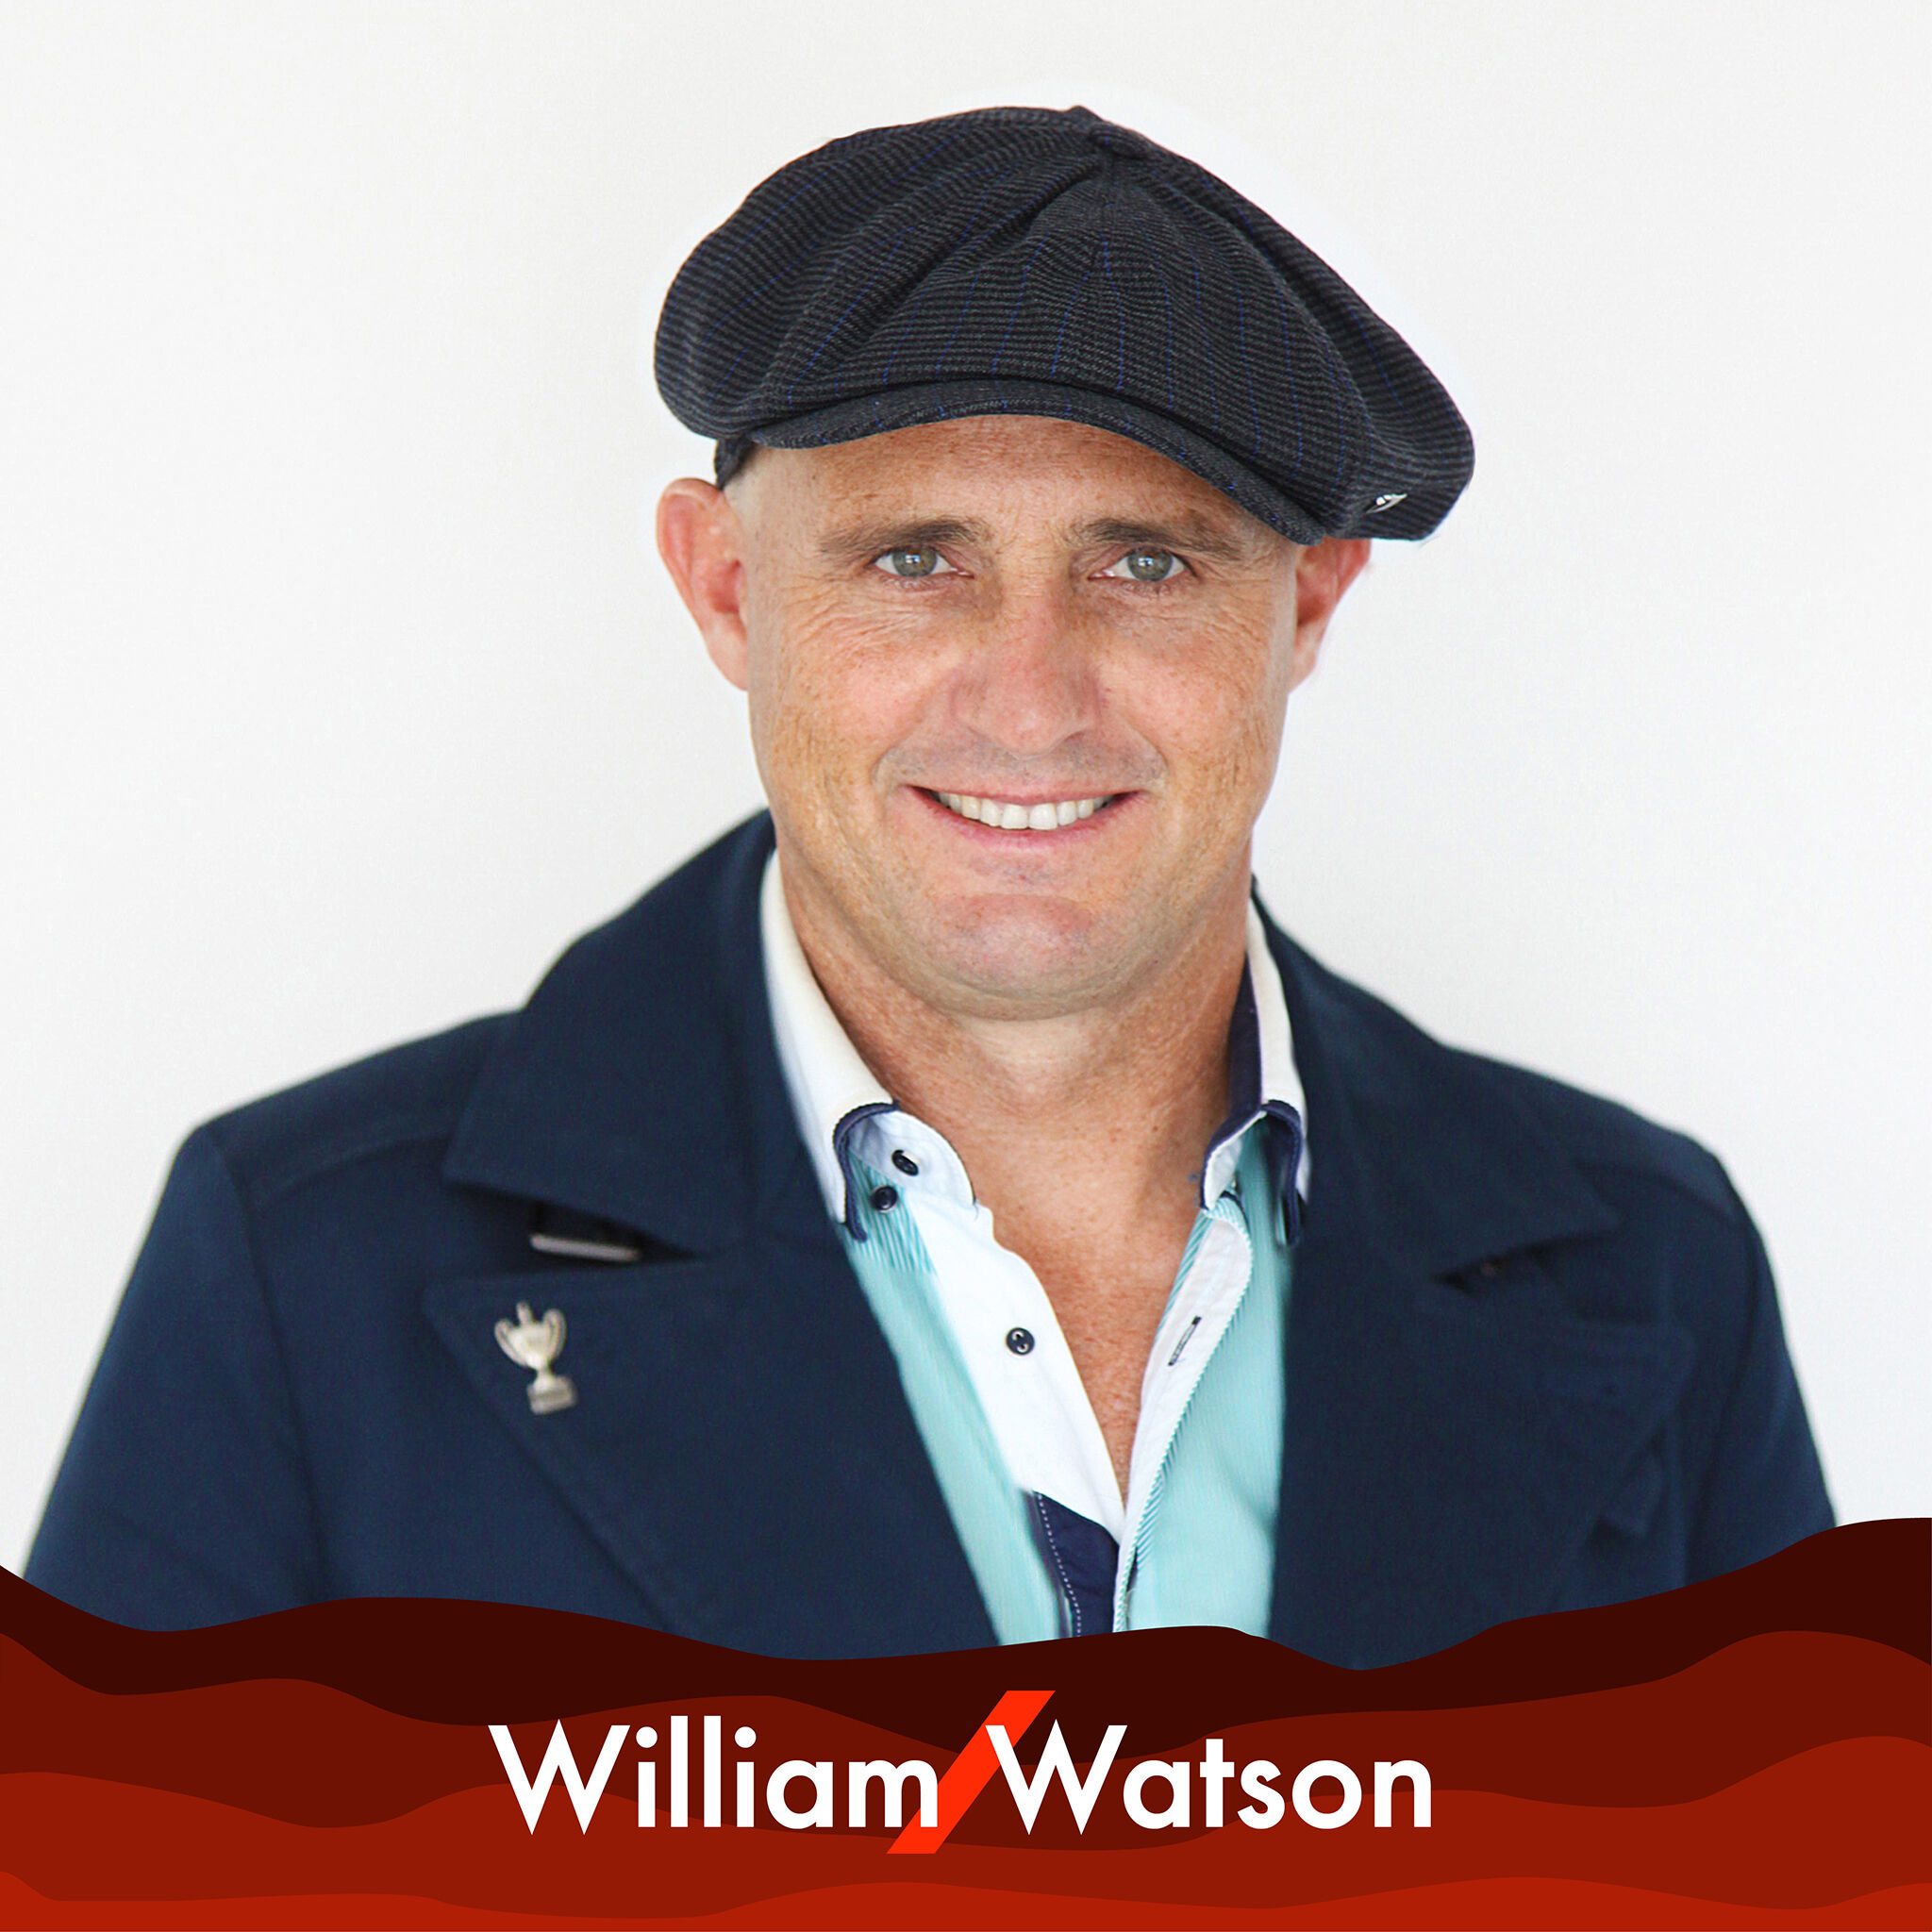 A picture of William Watson